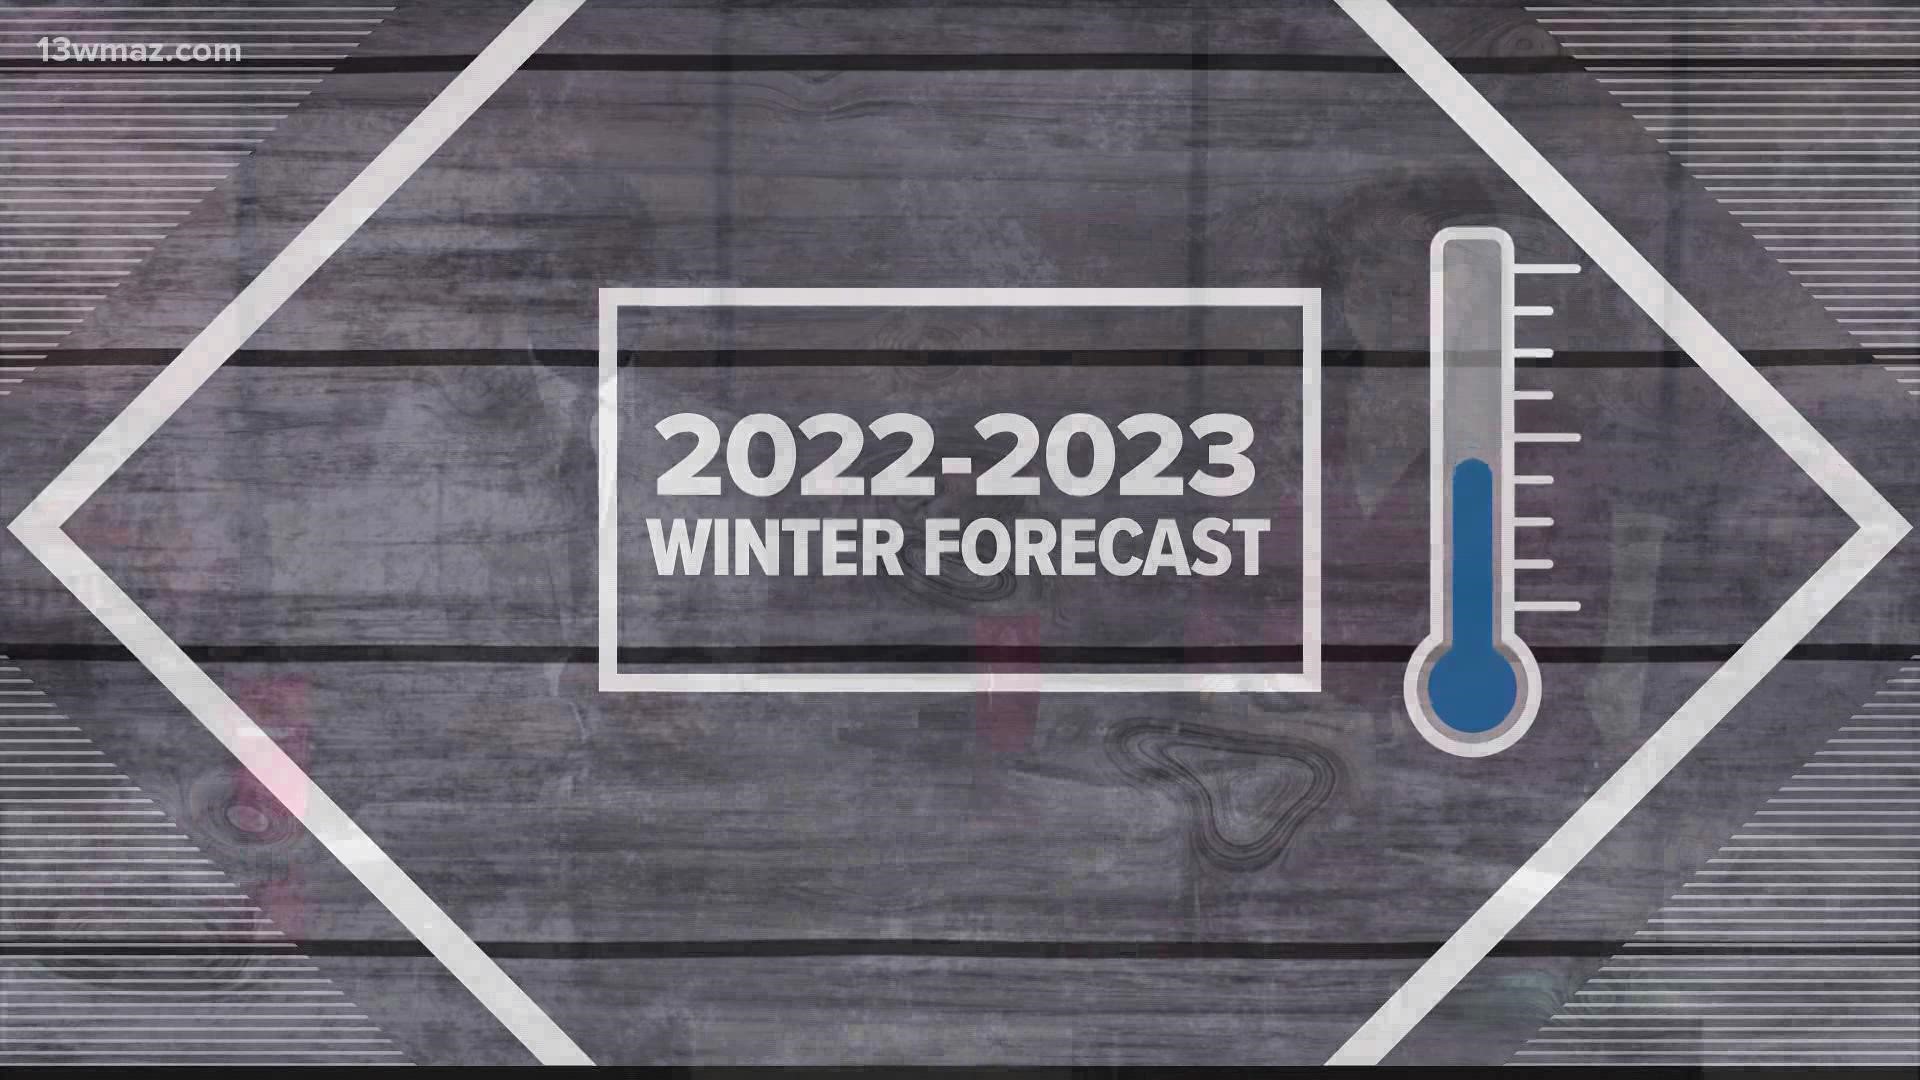 With November drawing to a close, the 13WMAZ Weather Team poured over the data for the upcoming winter, creating the 2022-2023 Winter Forecast.